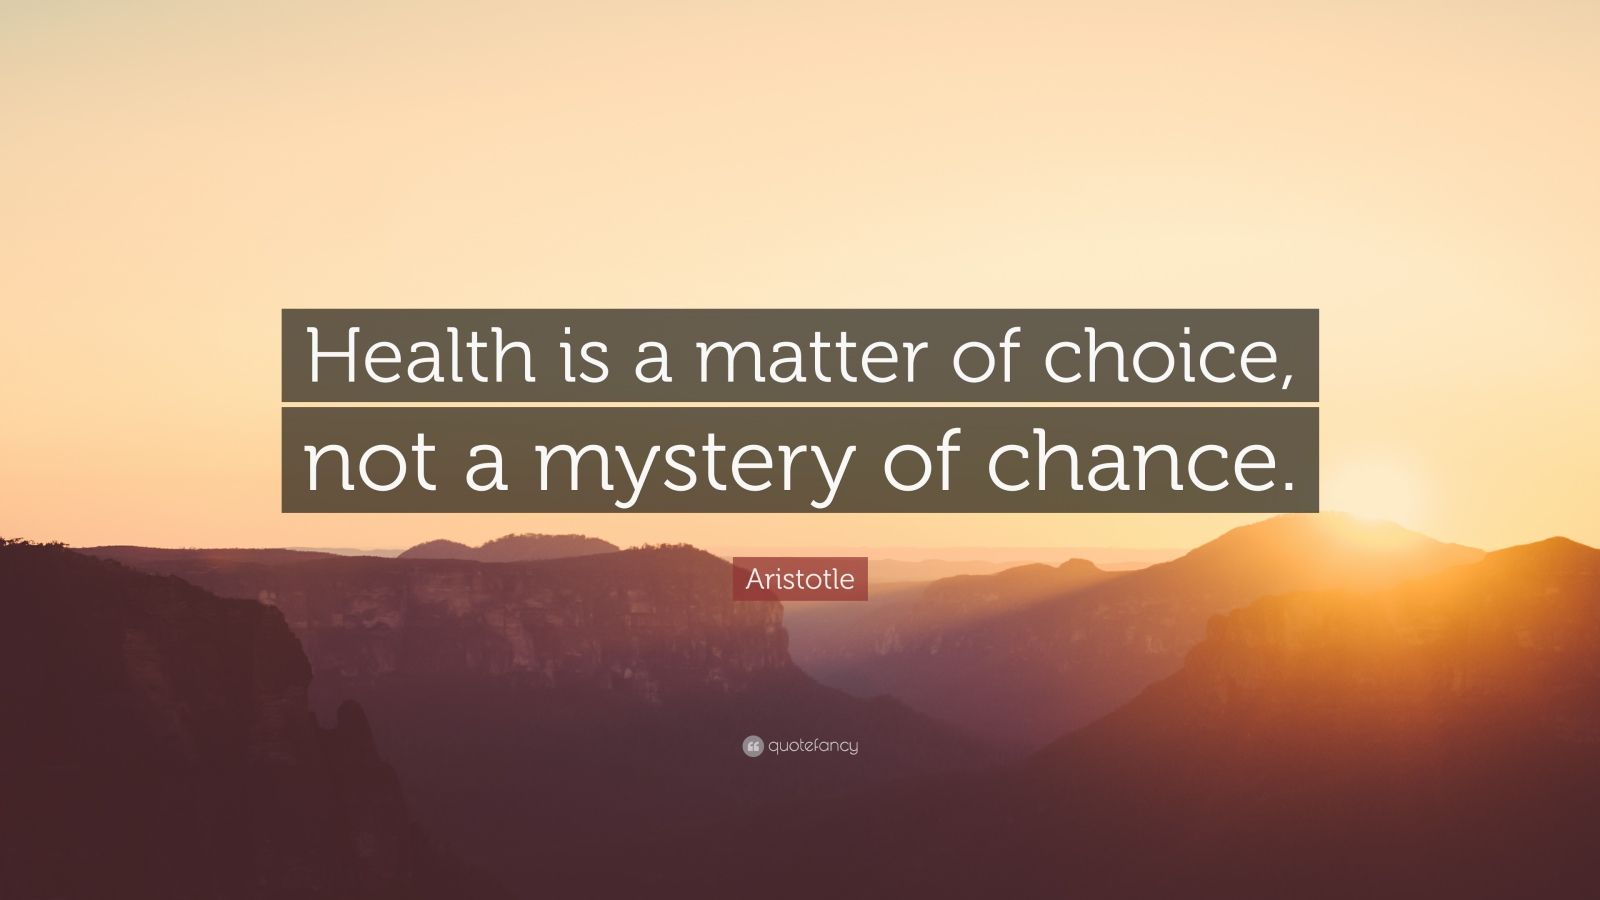 Aristotle Quote: “Health is a matter of choice, not a mystery of chance.”